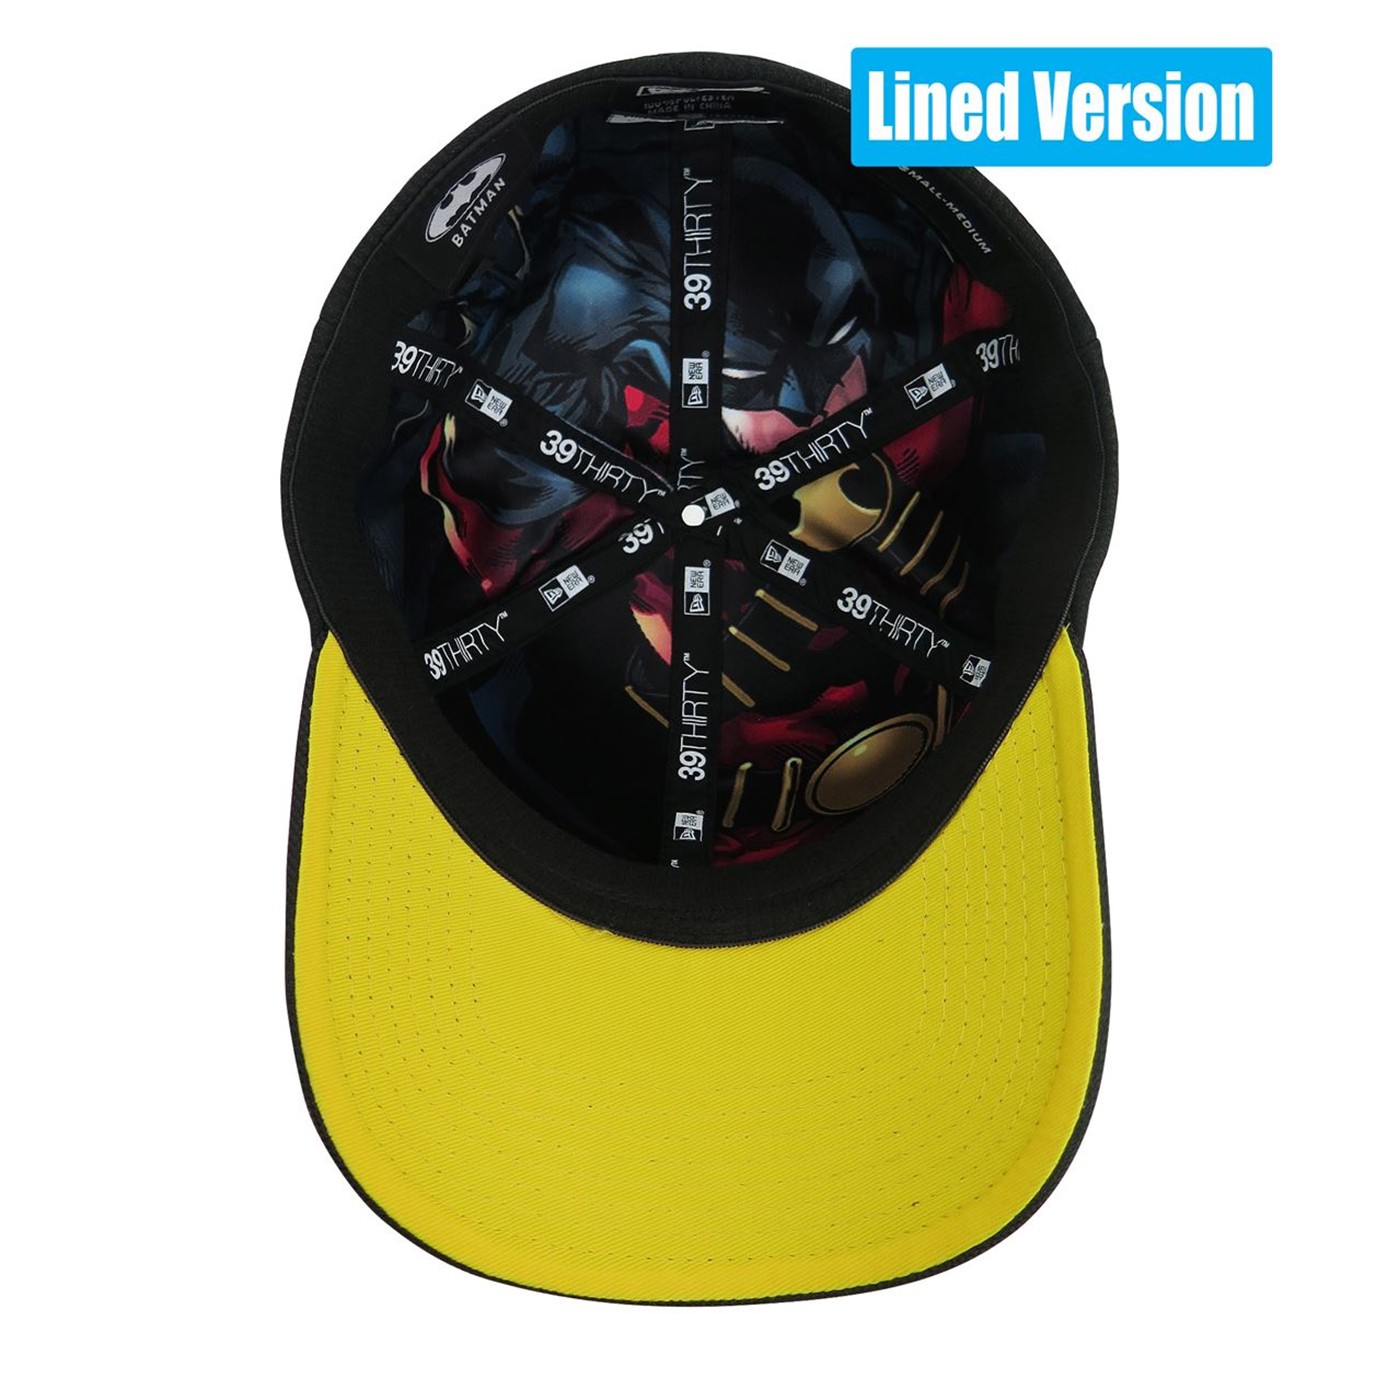 Red Robin Symbol Armor 39Thirty Fitted Hat